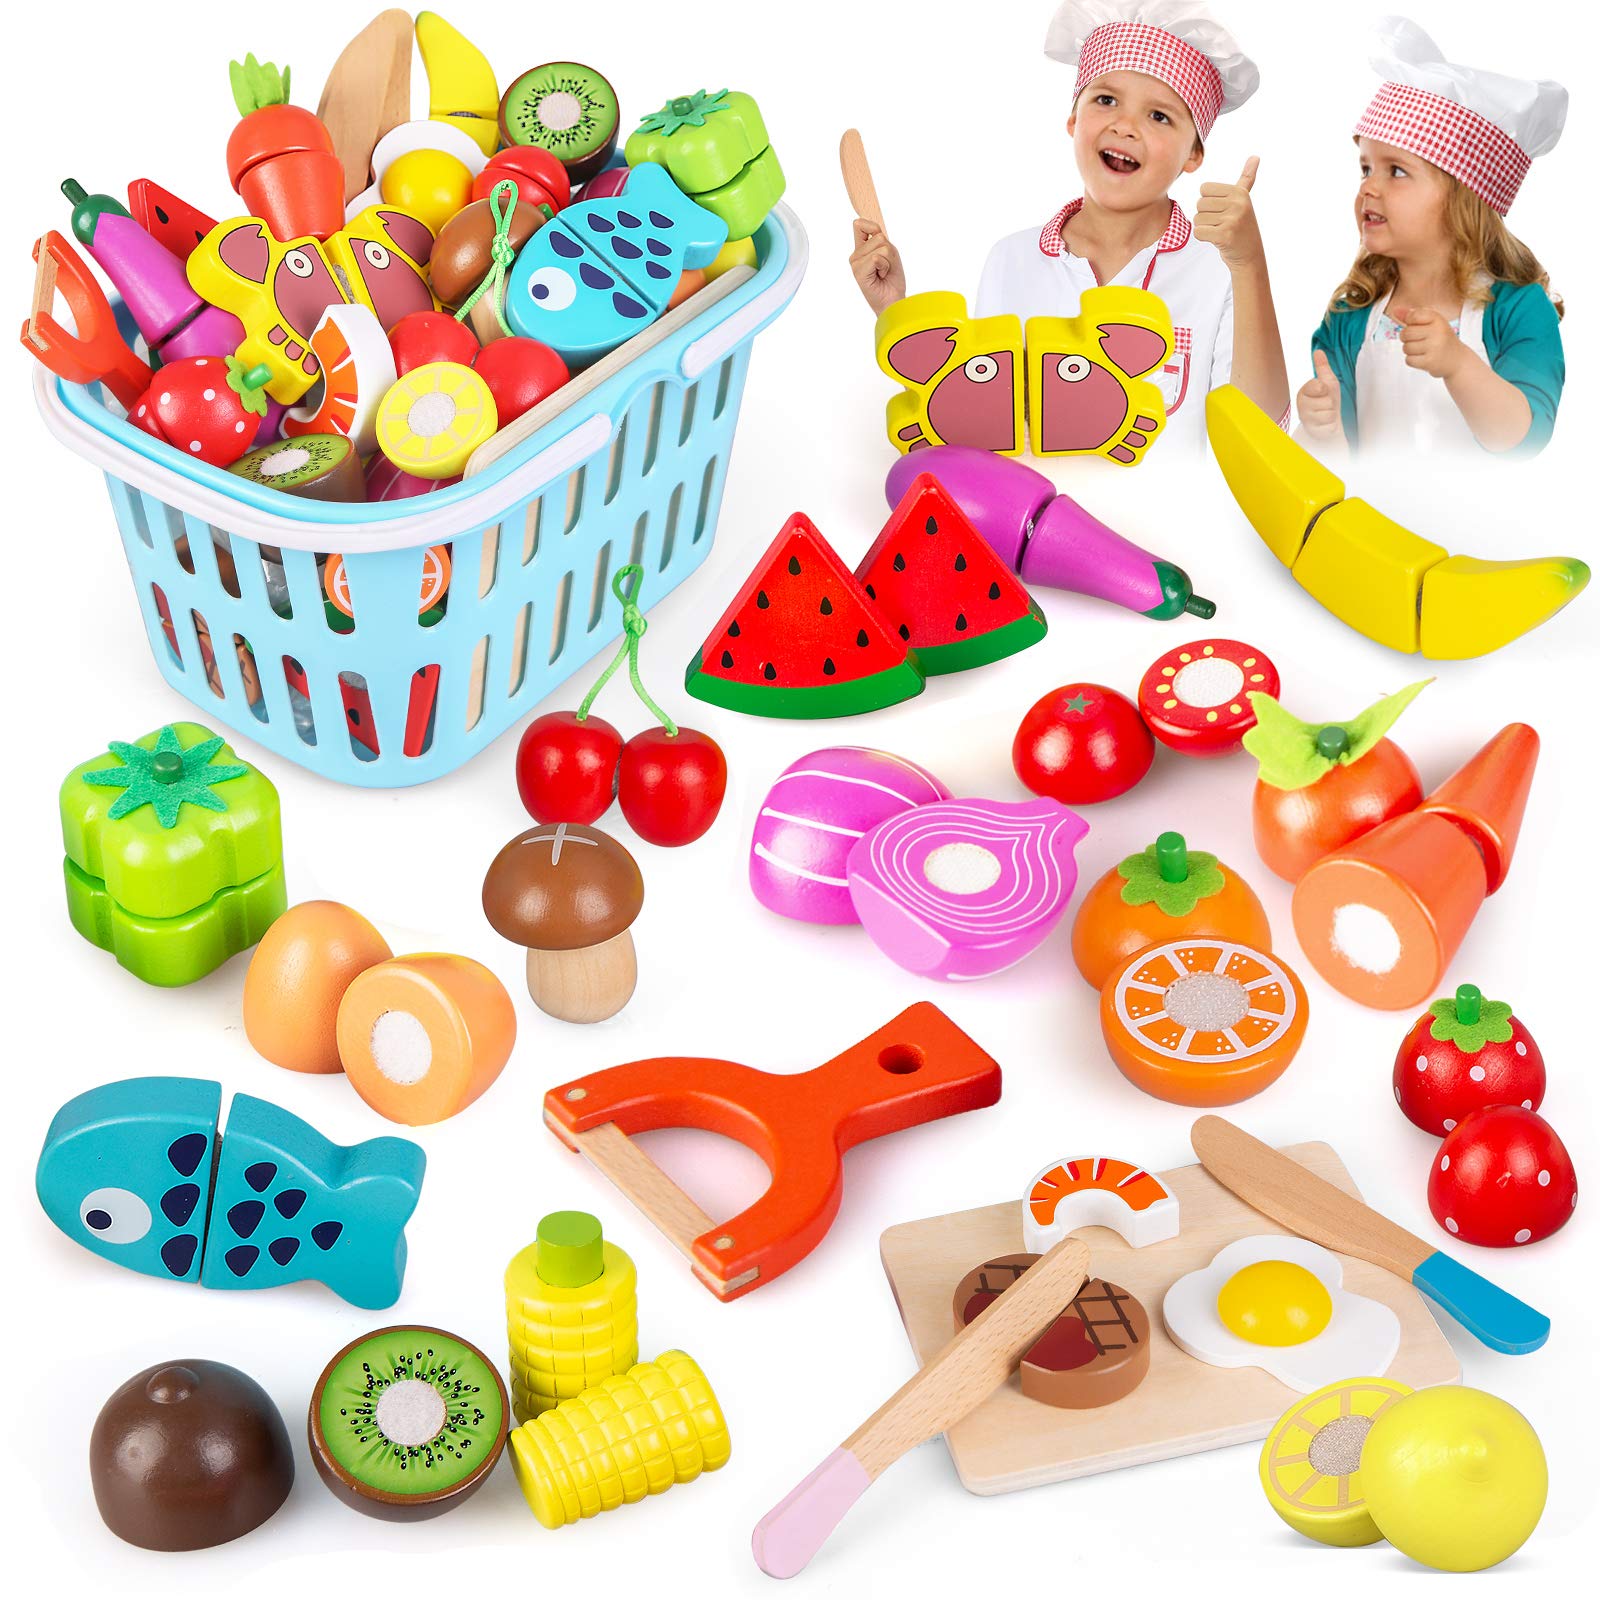 Shimfun Play Food, 220Pc Play Food Sets for Kids Kitchen - Toy Food ...